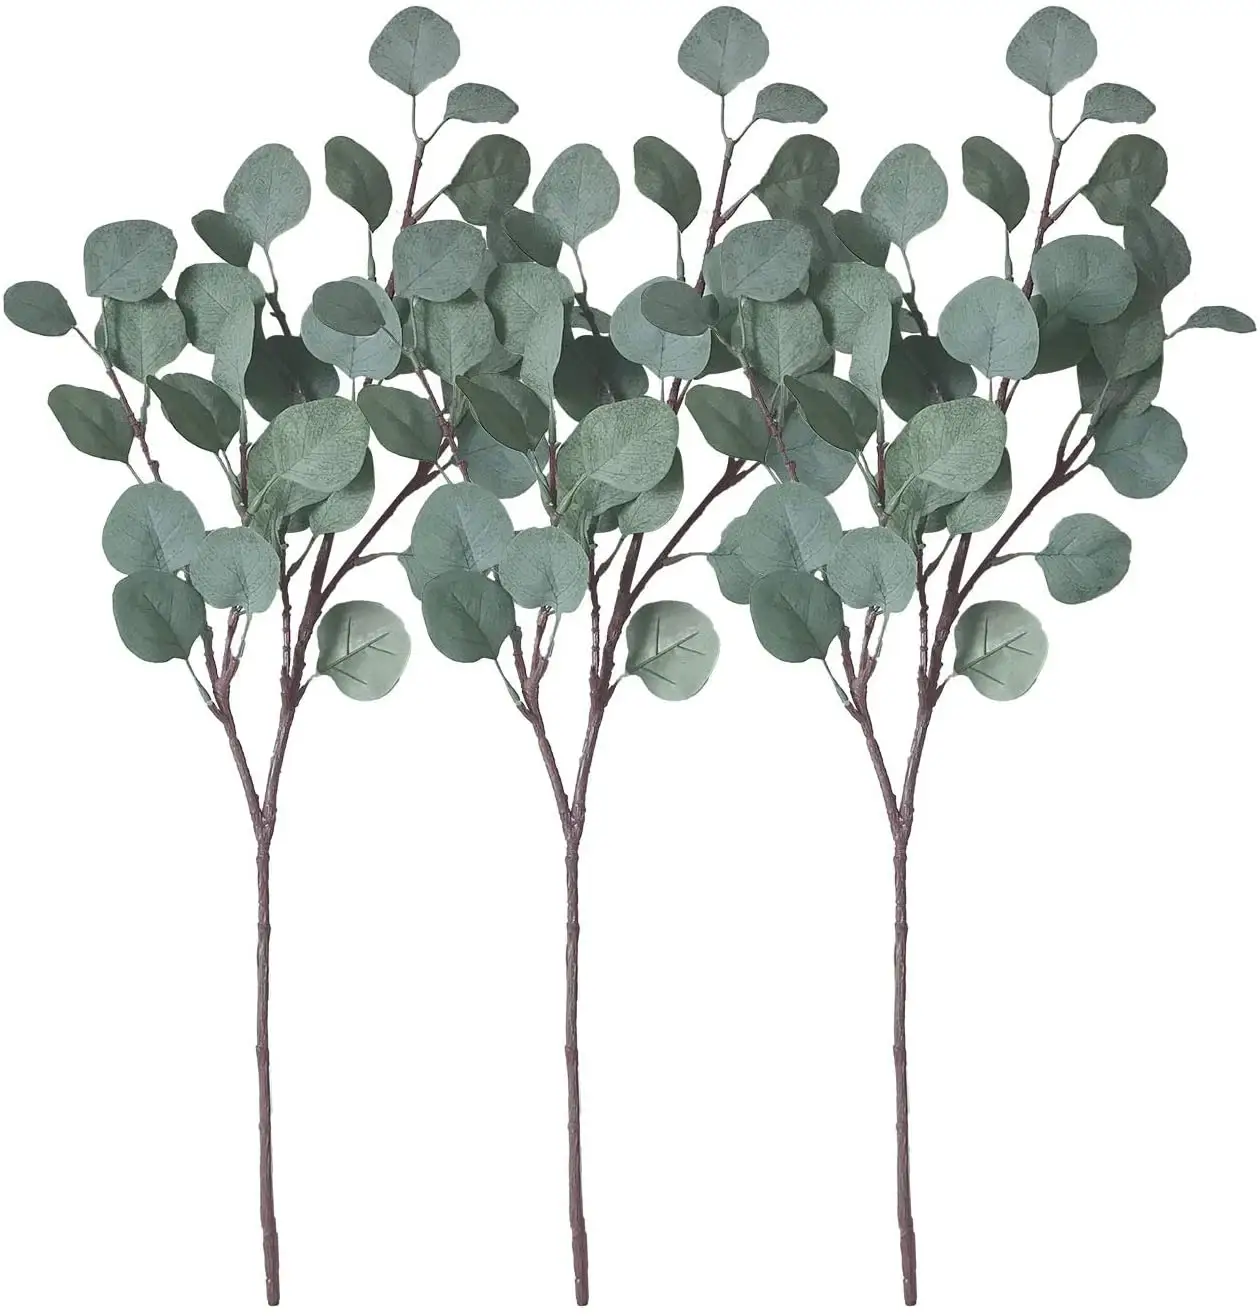 Artificial Eucalyptus Garland Long Silver Dollar Leaves Foliage Plants Greenery Faux Plastic Branches Greens Bushes